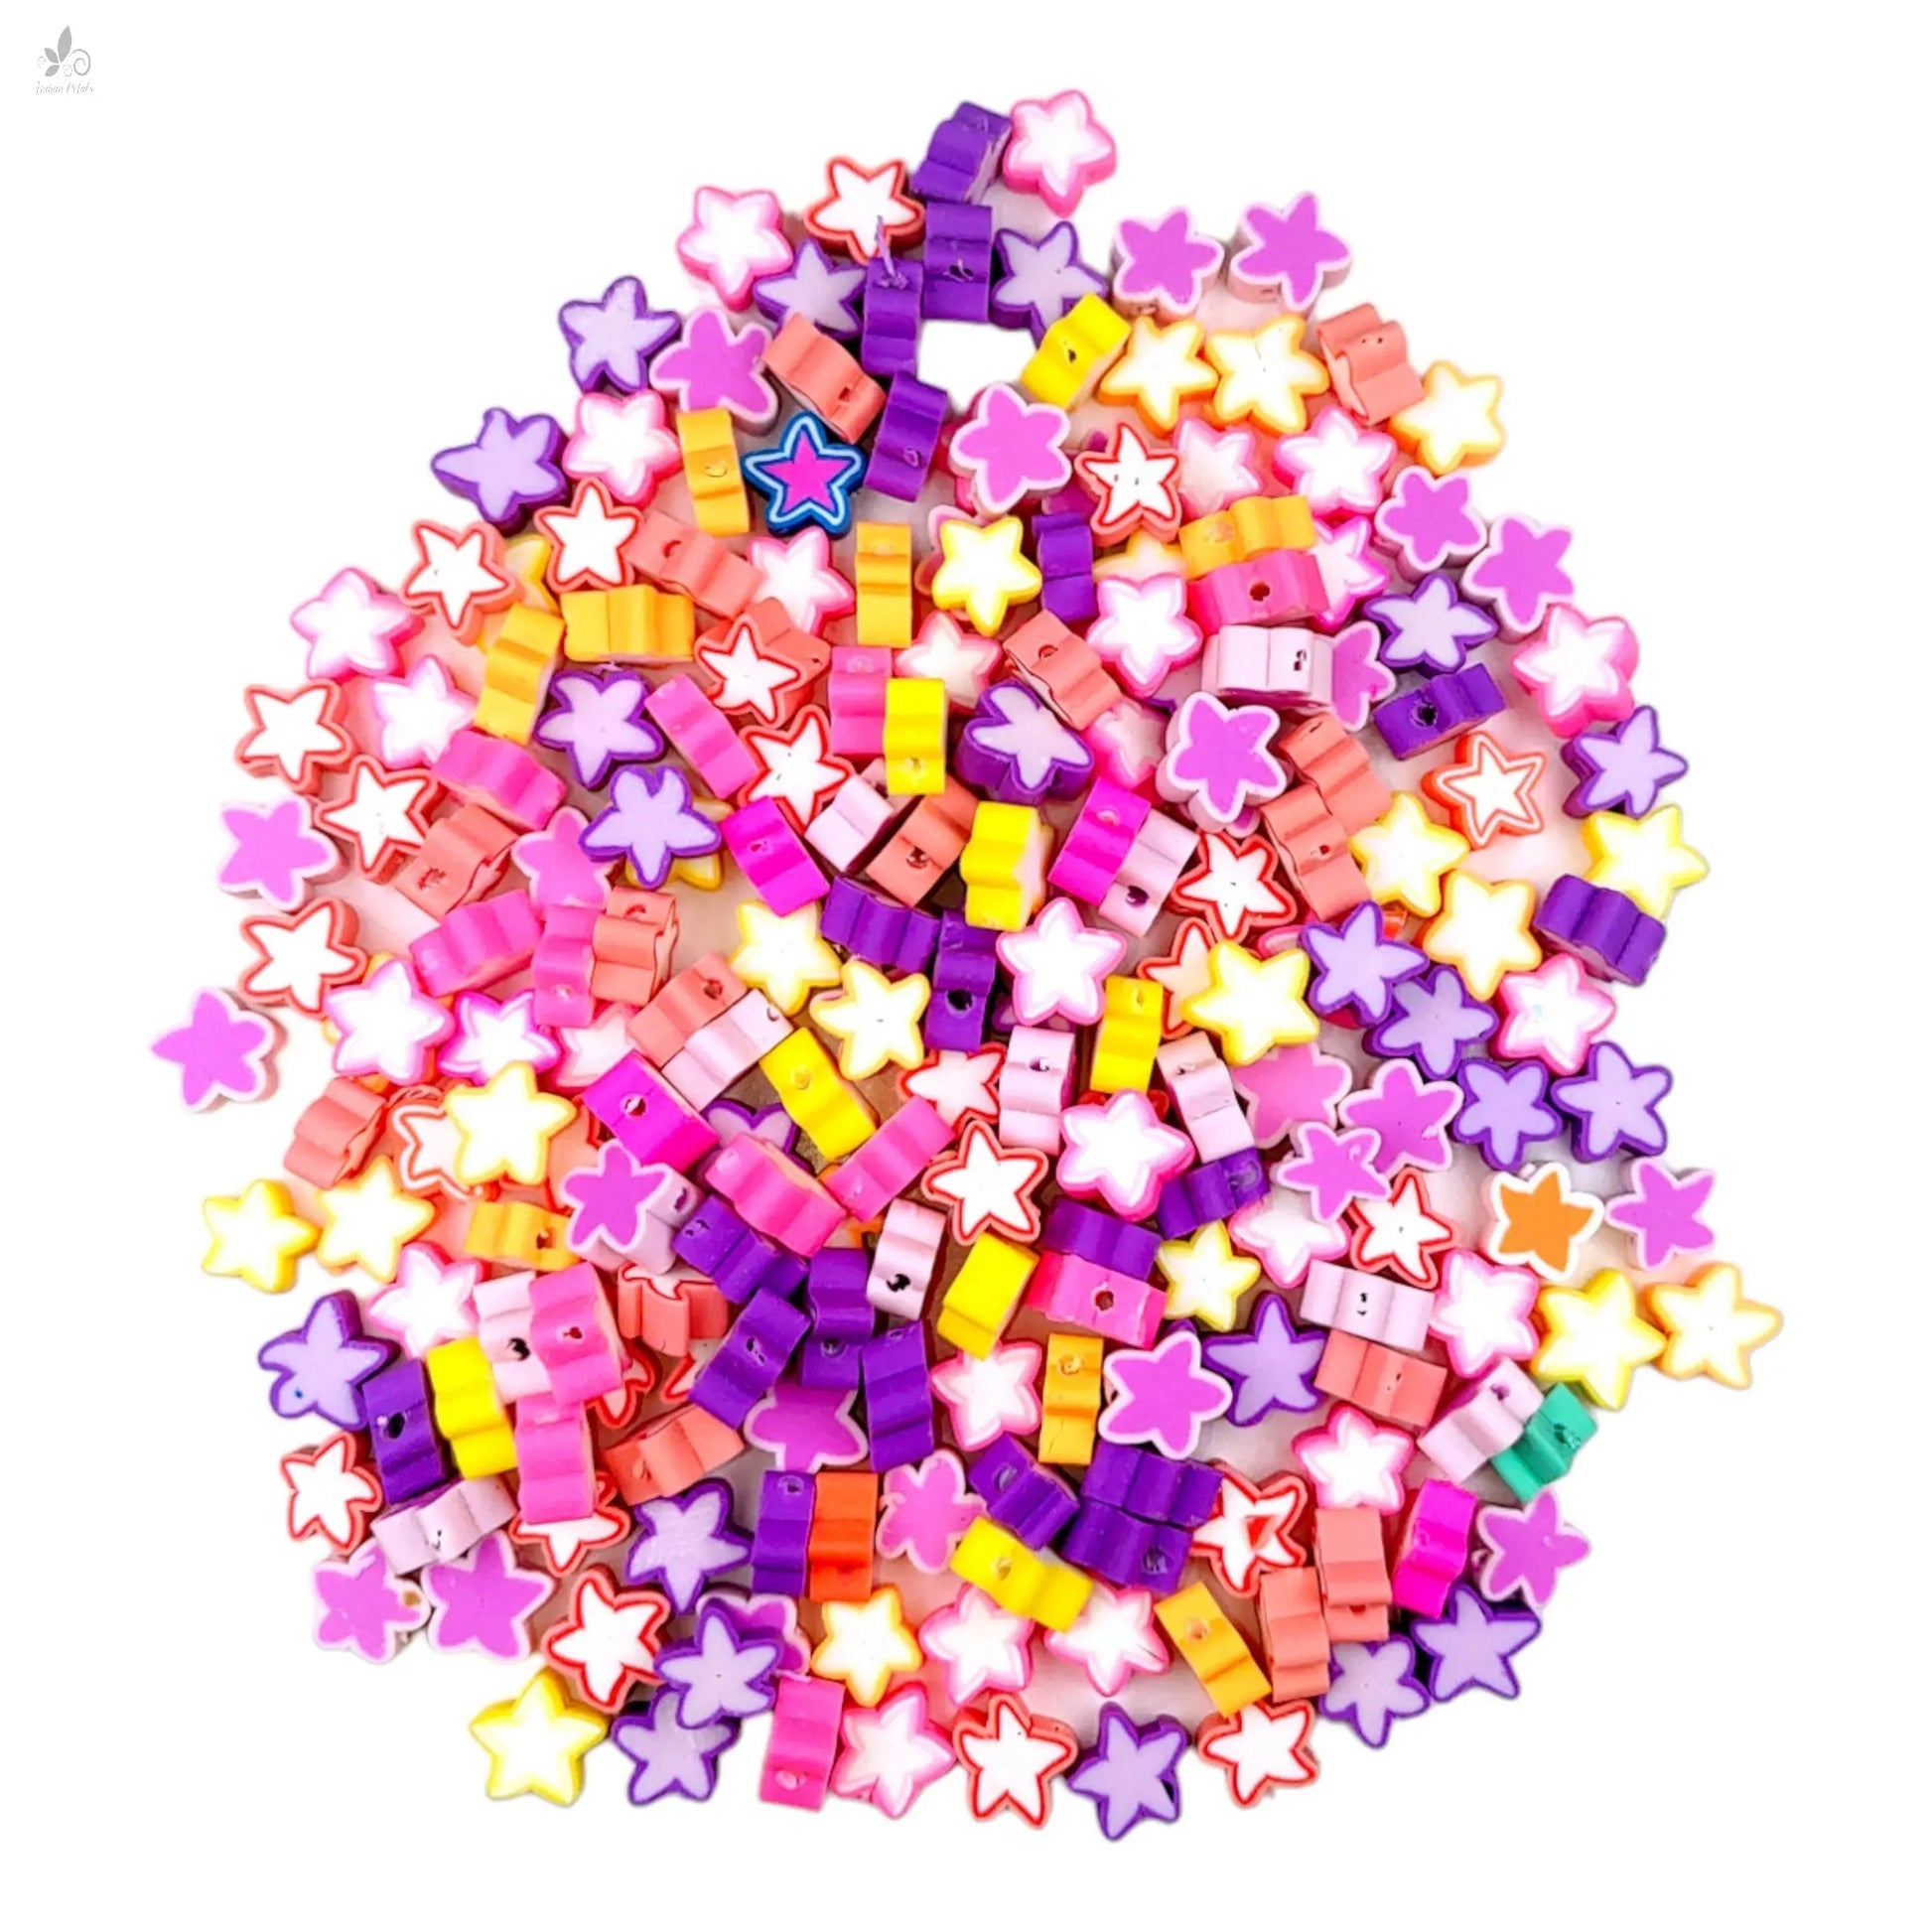 Colorefull Star's Shape Soft Resin Motif For Crafting or Decoration - 13538